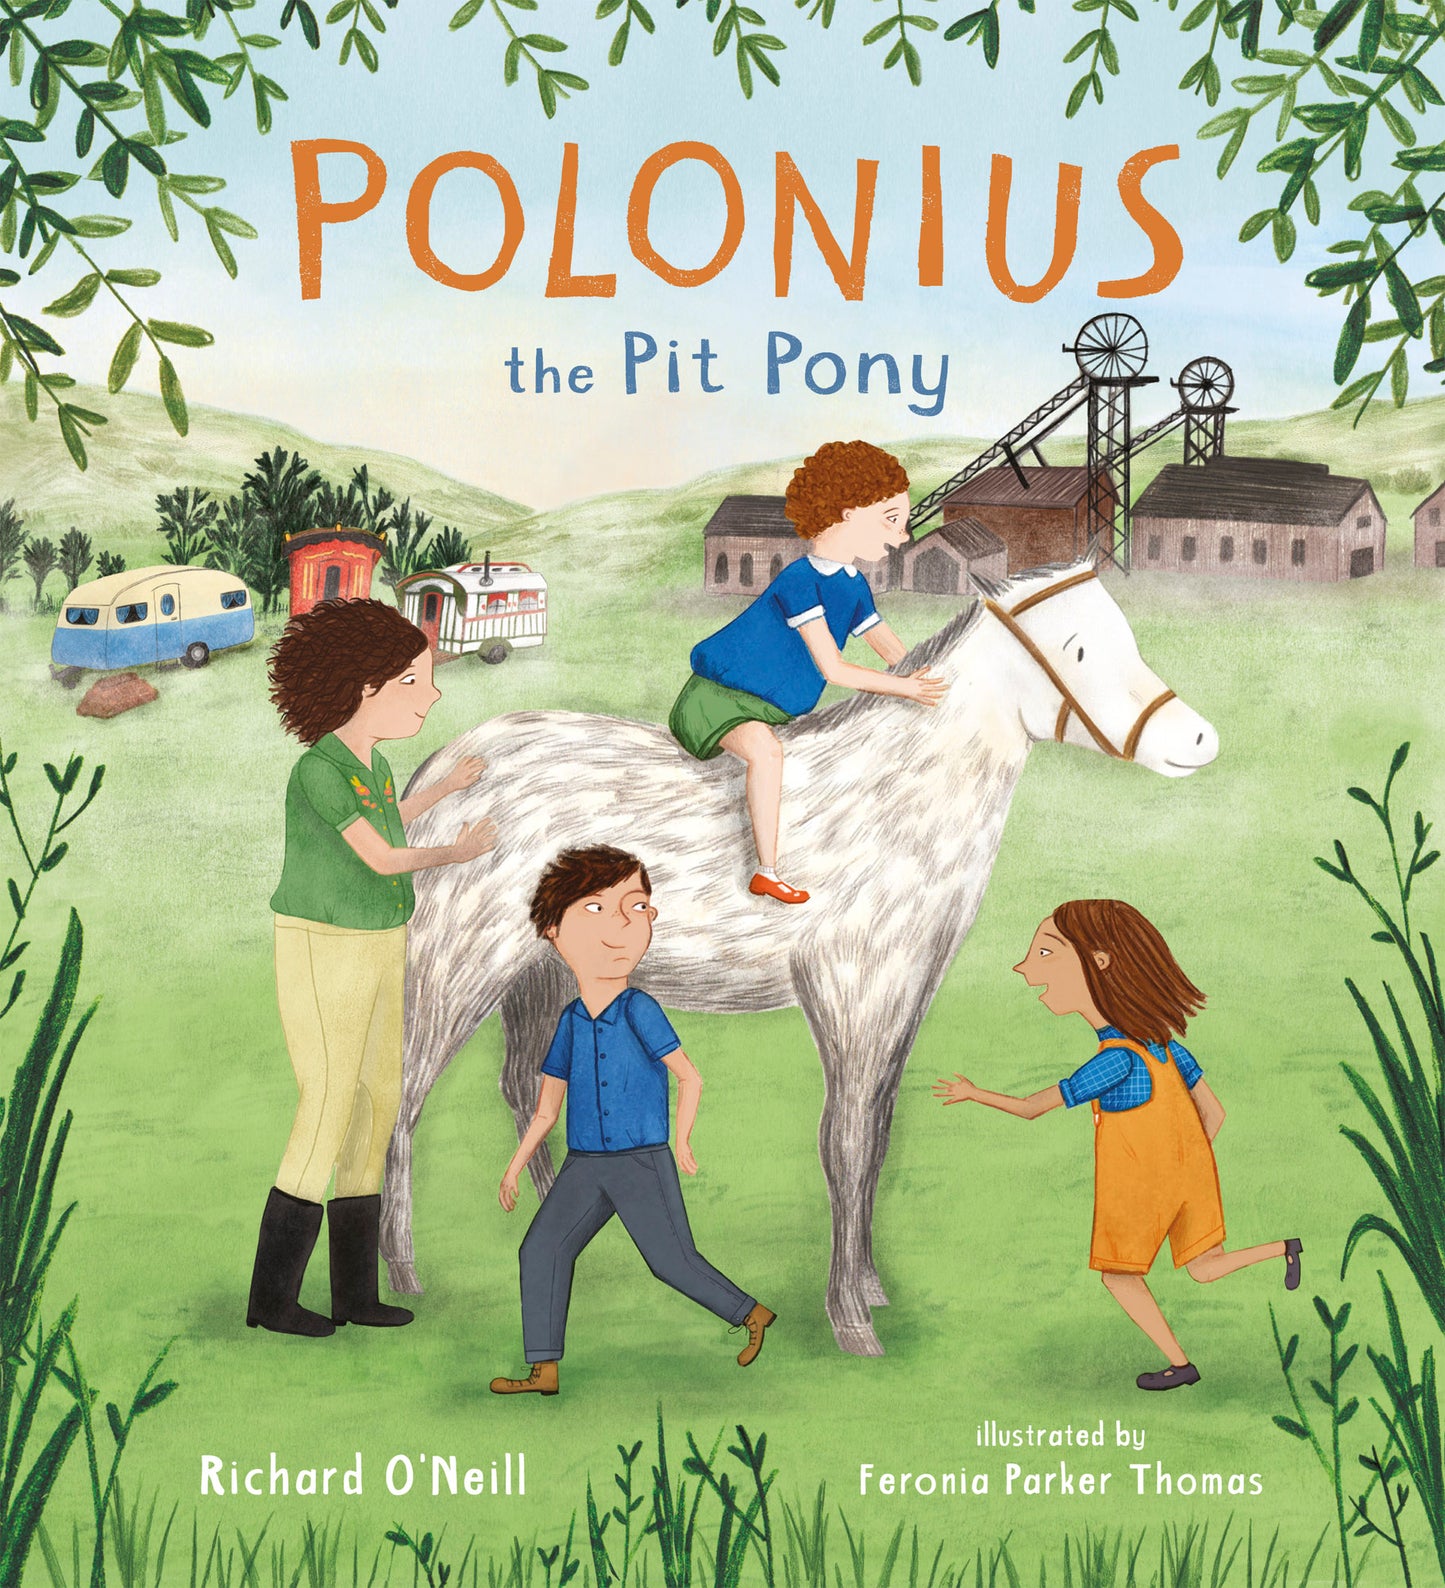 Polonius the Pit Pony (Hardcover Edition)